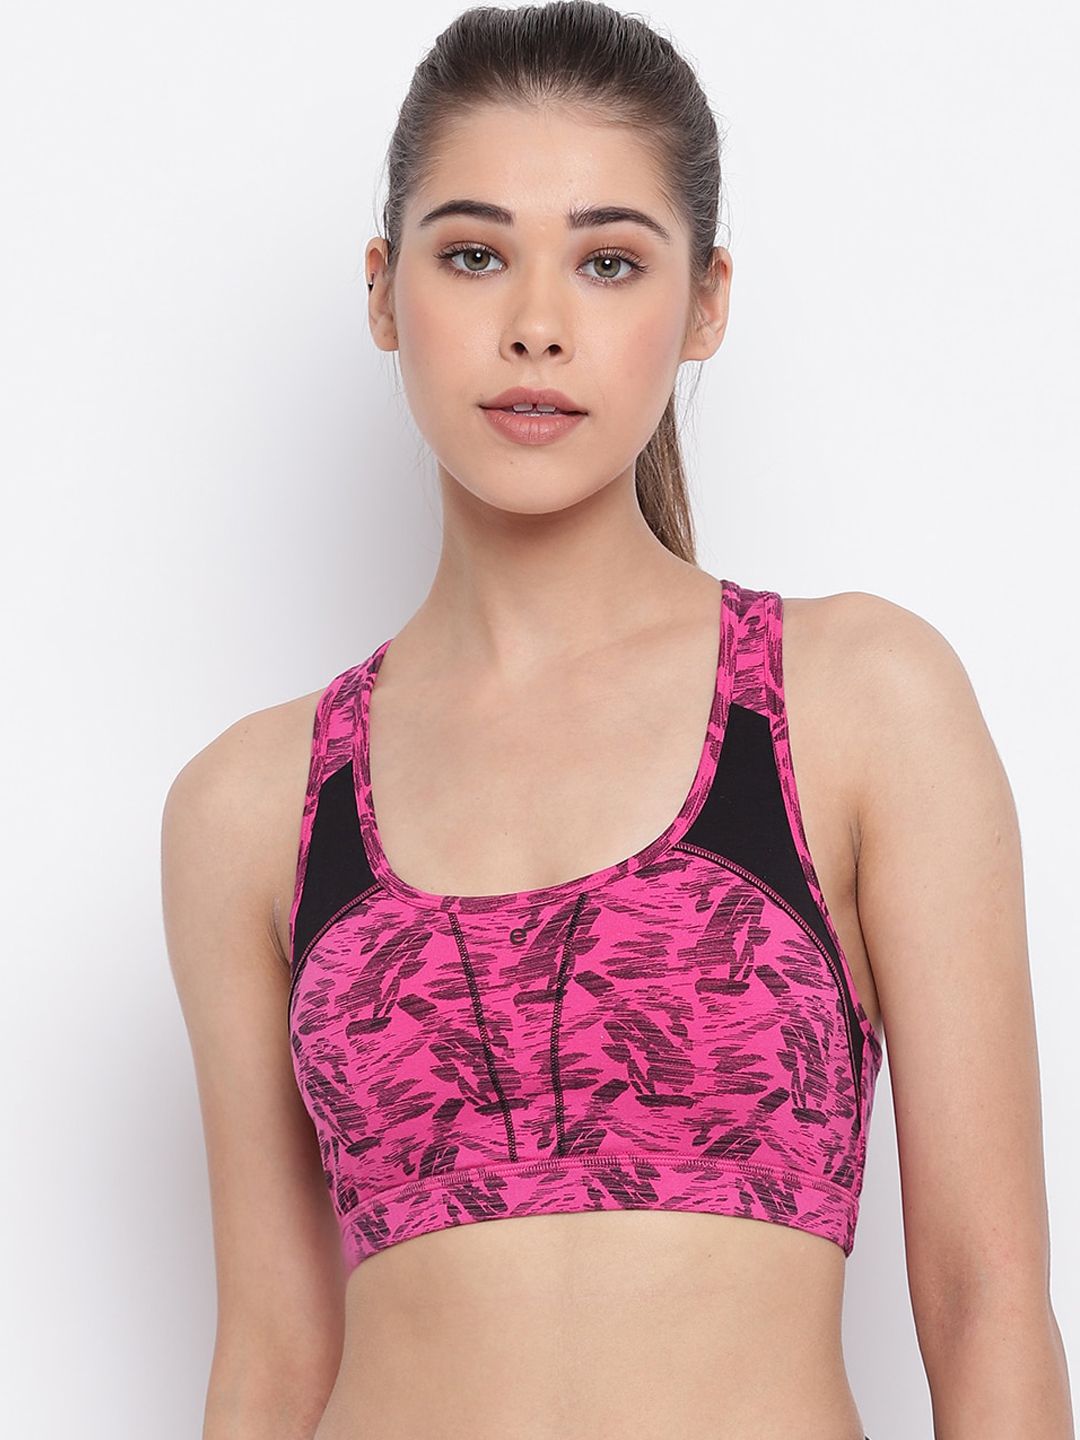 Enamor Pink Print Non-Wired Removable Pads High Coverage Medium Impact Sports Bra SB08 Price in India